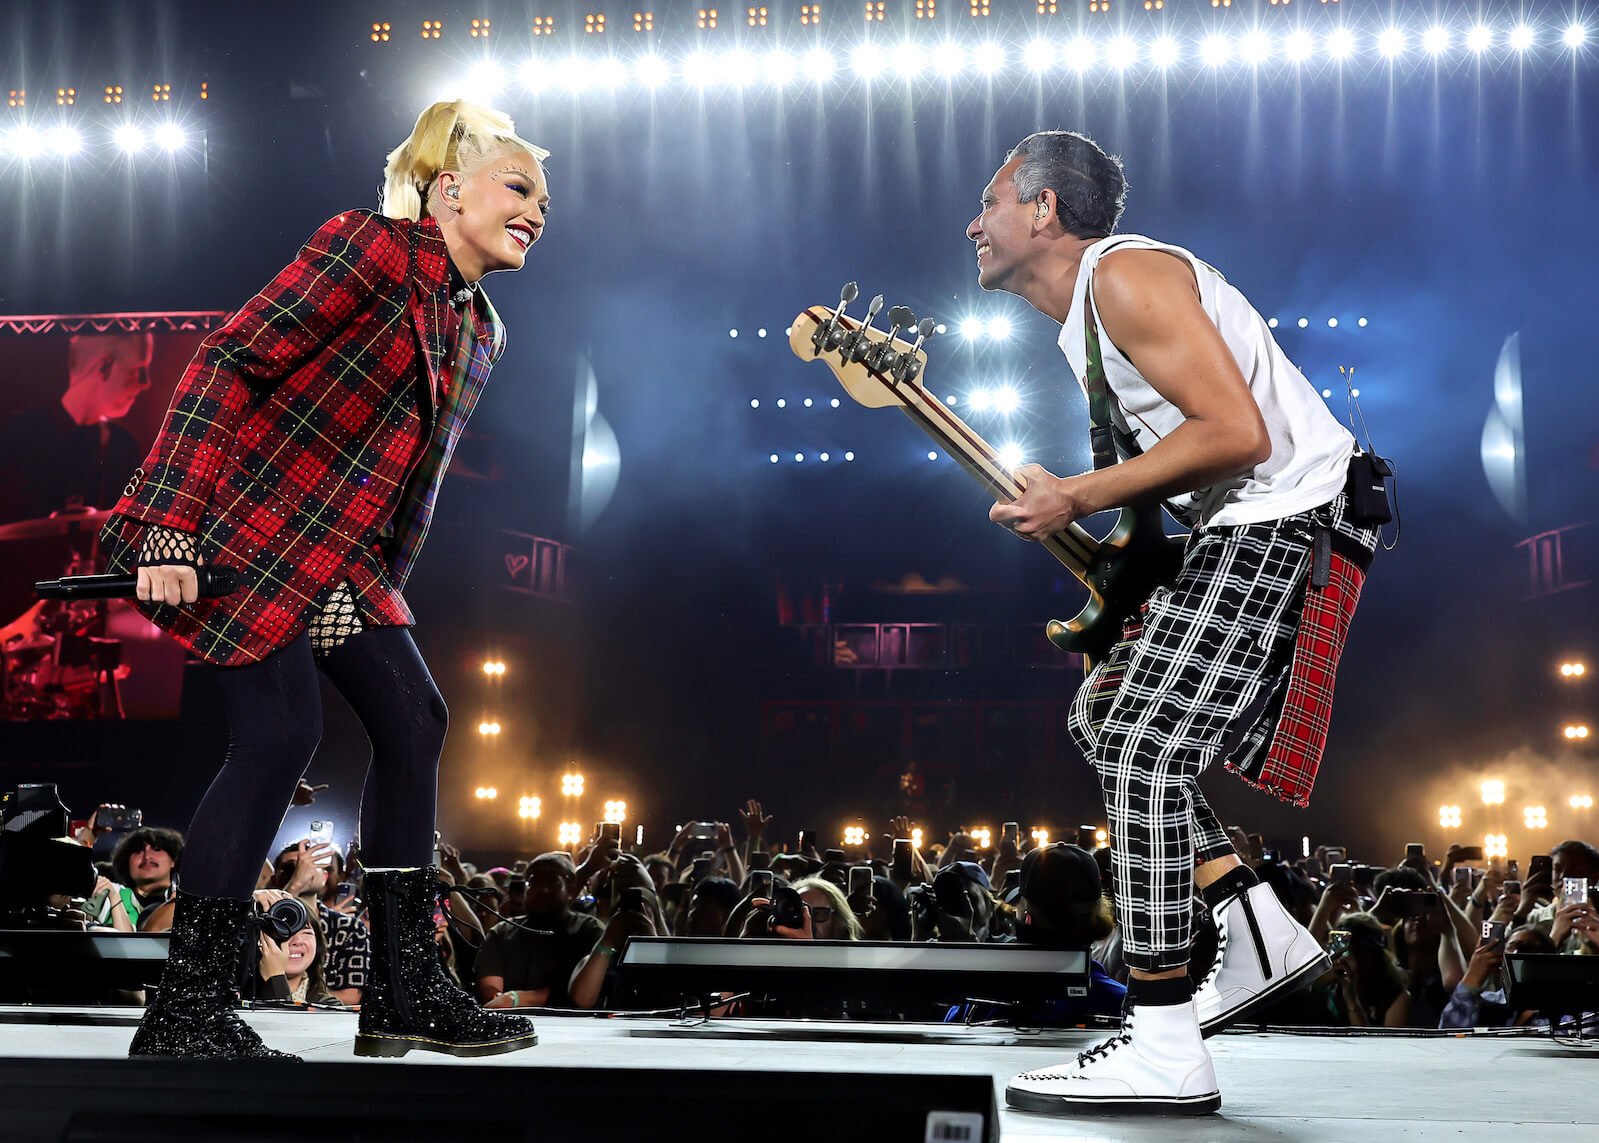 Gwen Stefani and Tony Kanal of No Doubt dancing on stage at Coachella Music and Arts Festival in 2024